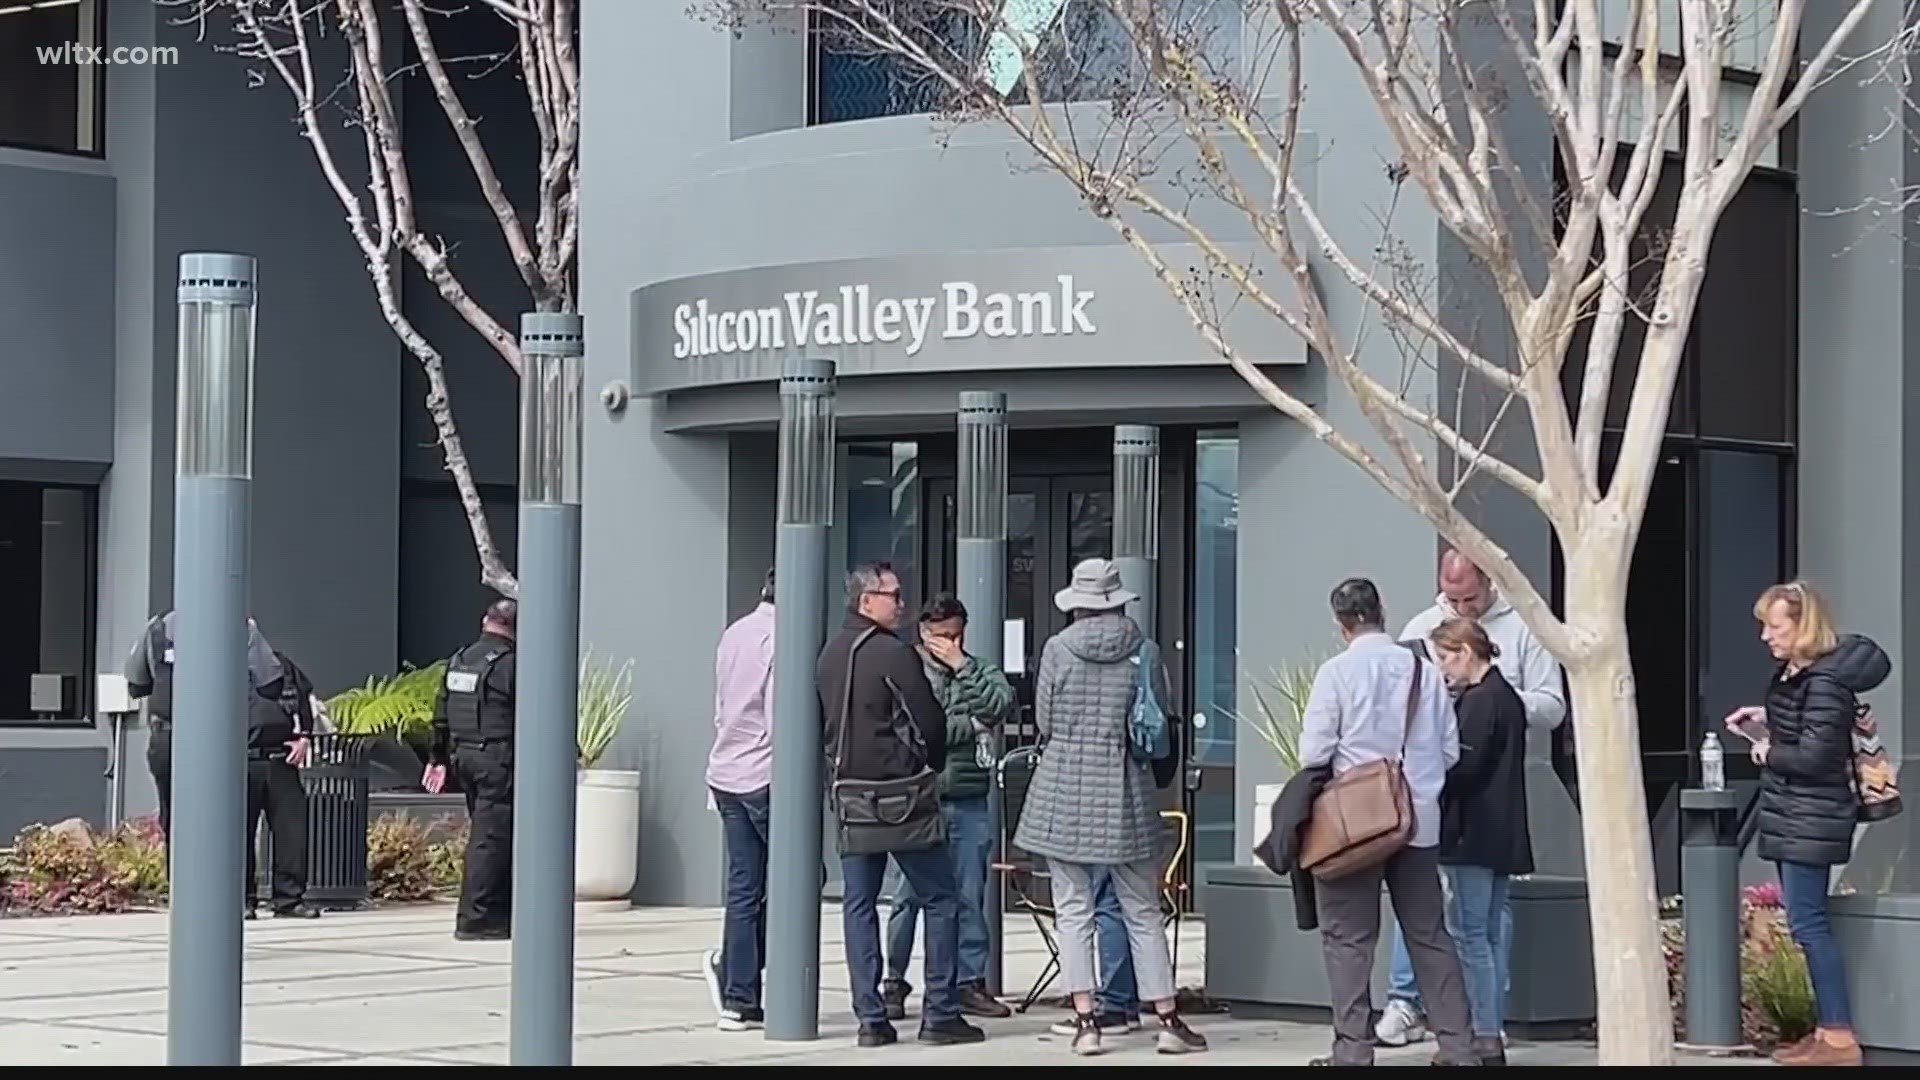 Depositors withdrew savings and investors broadly sold off bank shares Monday as the federal government raced to reassure Americans the banking system was secure.